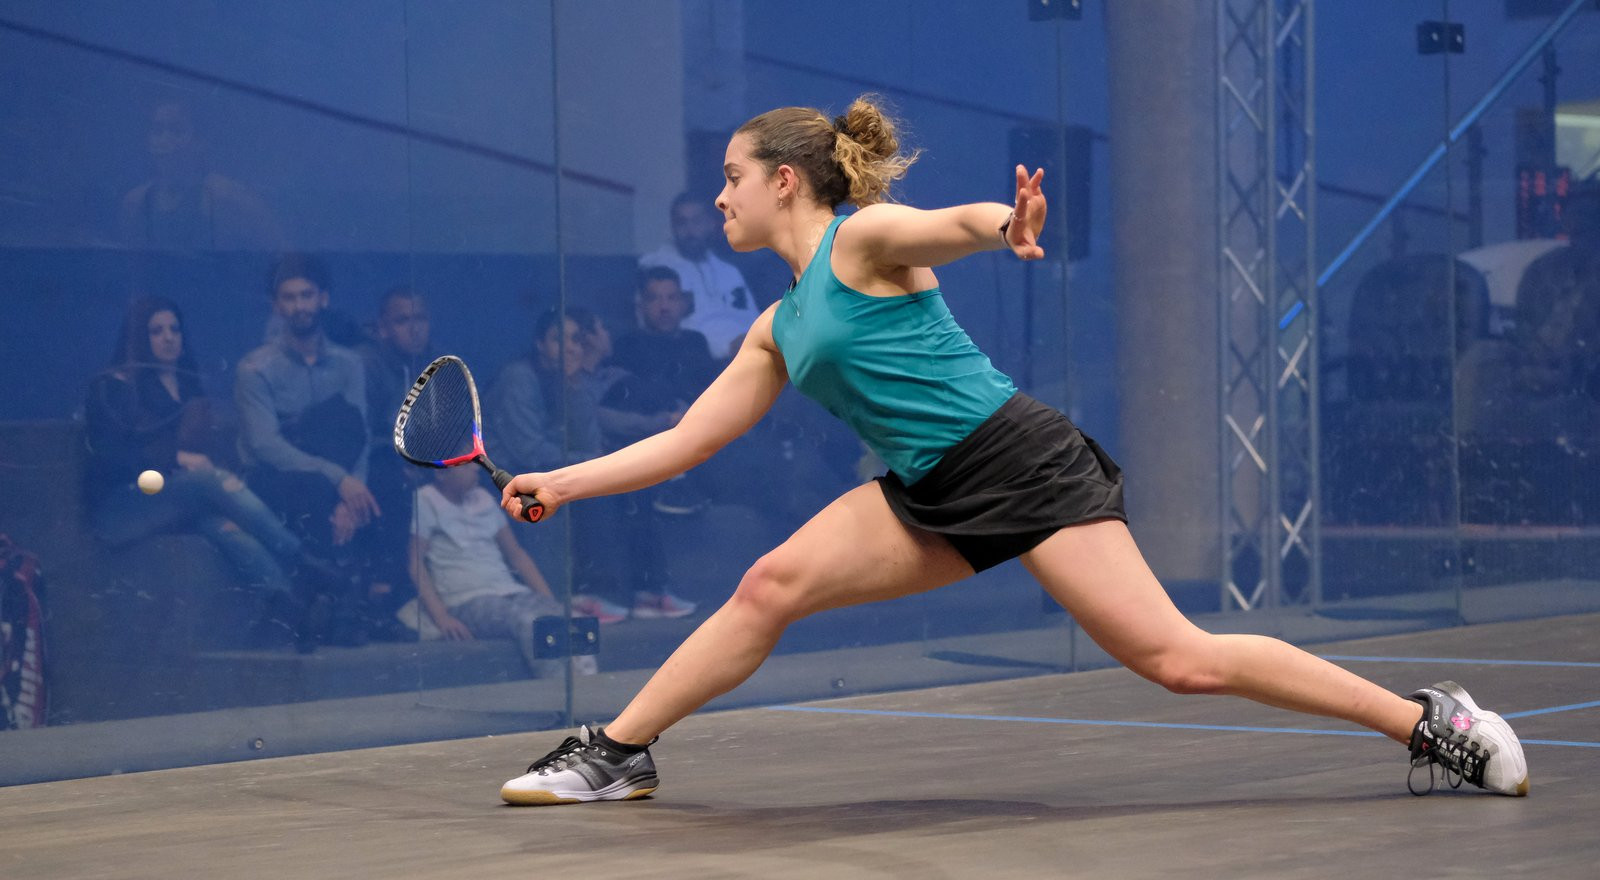 World number 67 Hana Ramadan recorded a surprise win against Mariam Metwally at the Black Ball Squash Open ©PSA